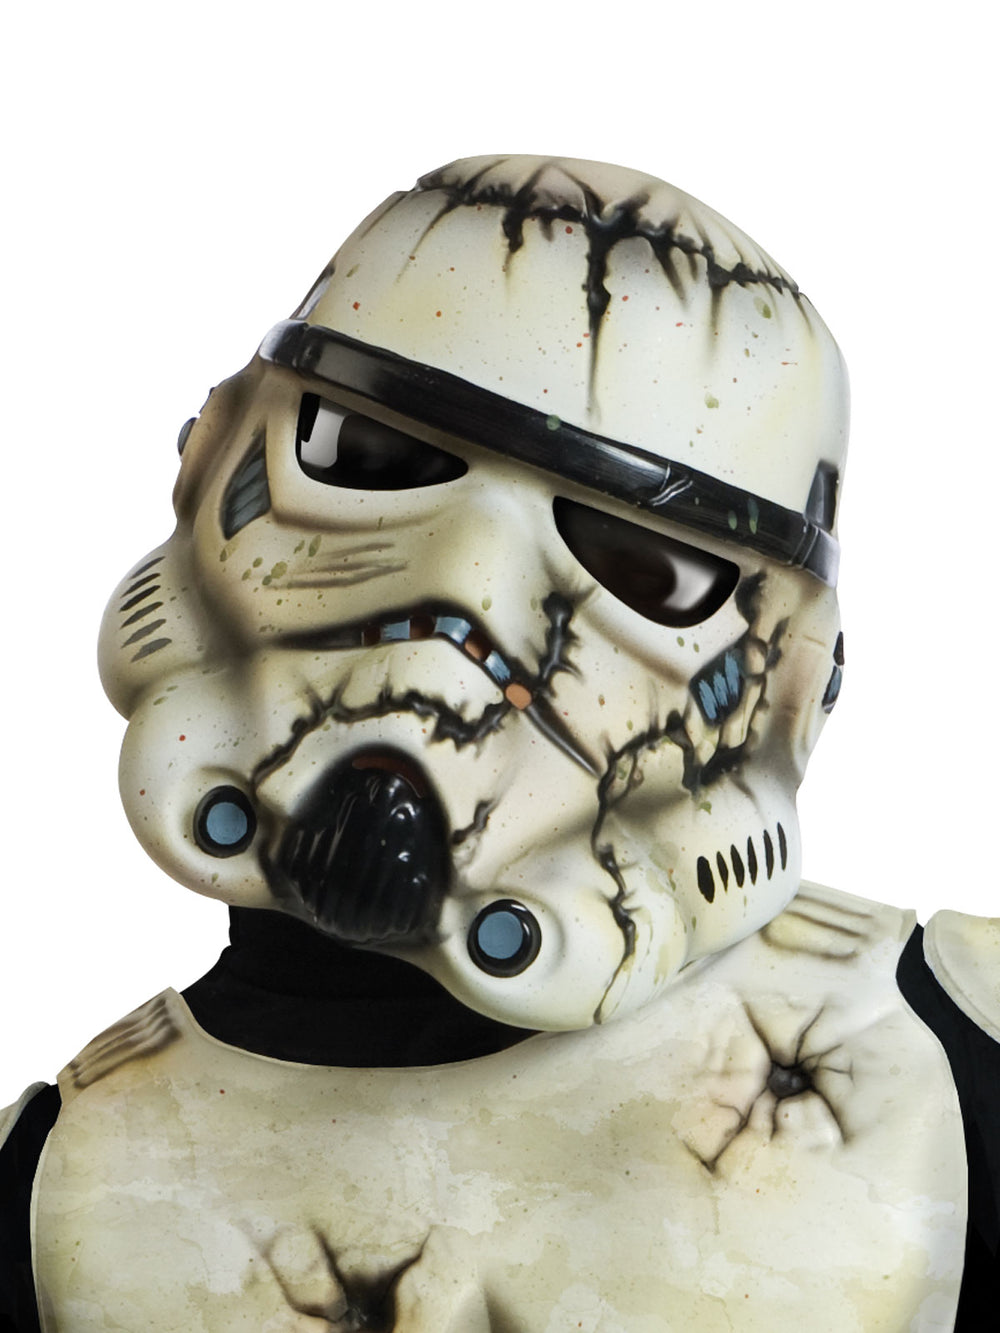 DEATH TROOPER DELUXE COSTUME, CHILD - Little Shop of Horrors